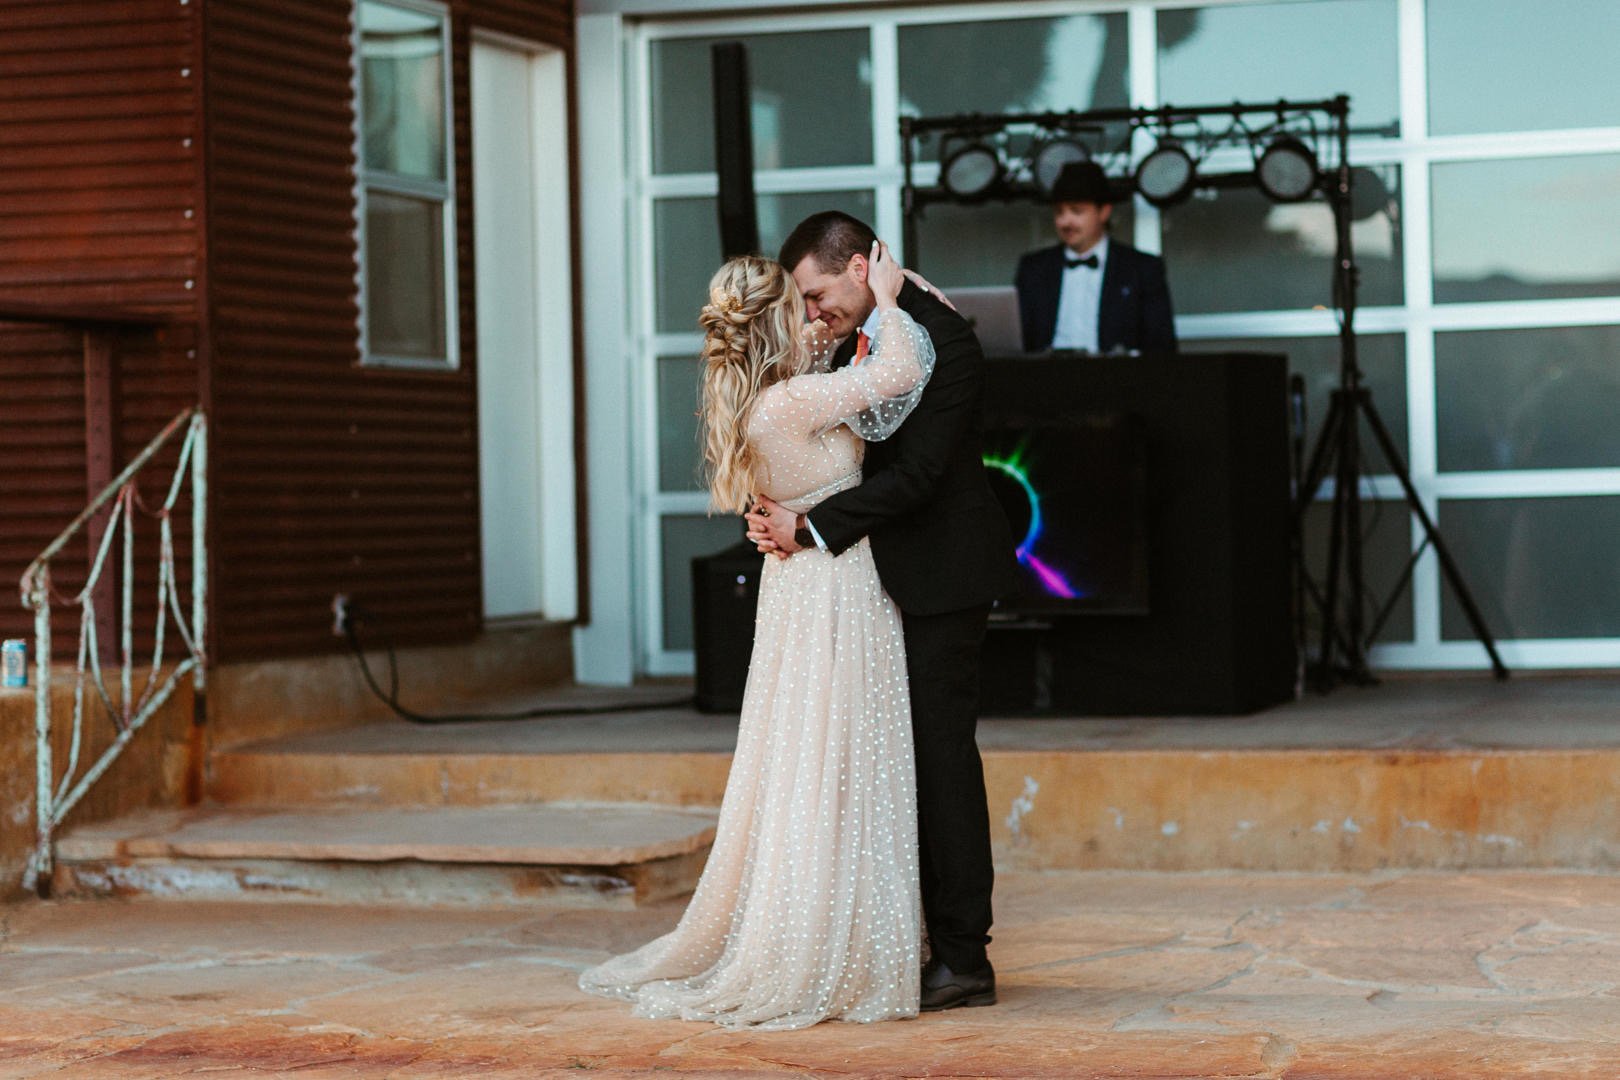 couple dancing to their 1st dance for DJ Jon Don Myers weddings and special events - bride - the knot - thumbtack - zola - wedding wire - best dj - philadelphia - pennsylvania - new jersey - new york weddings.jpeg